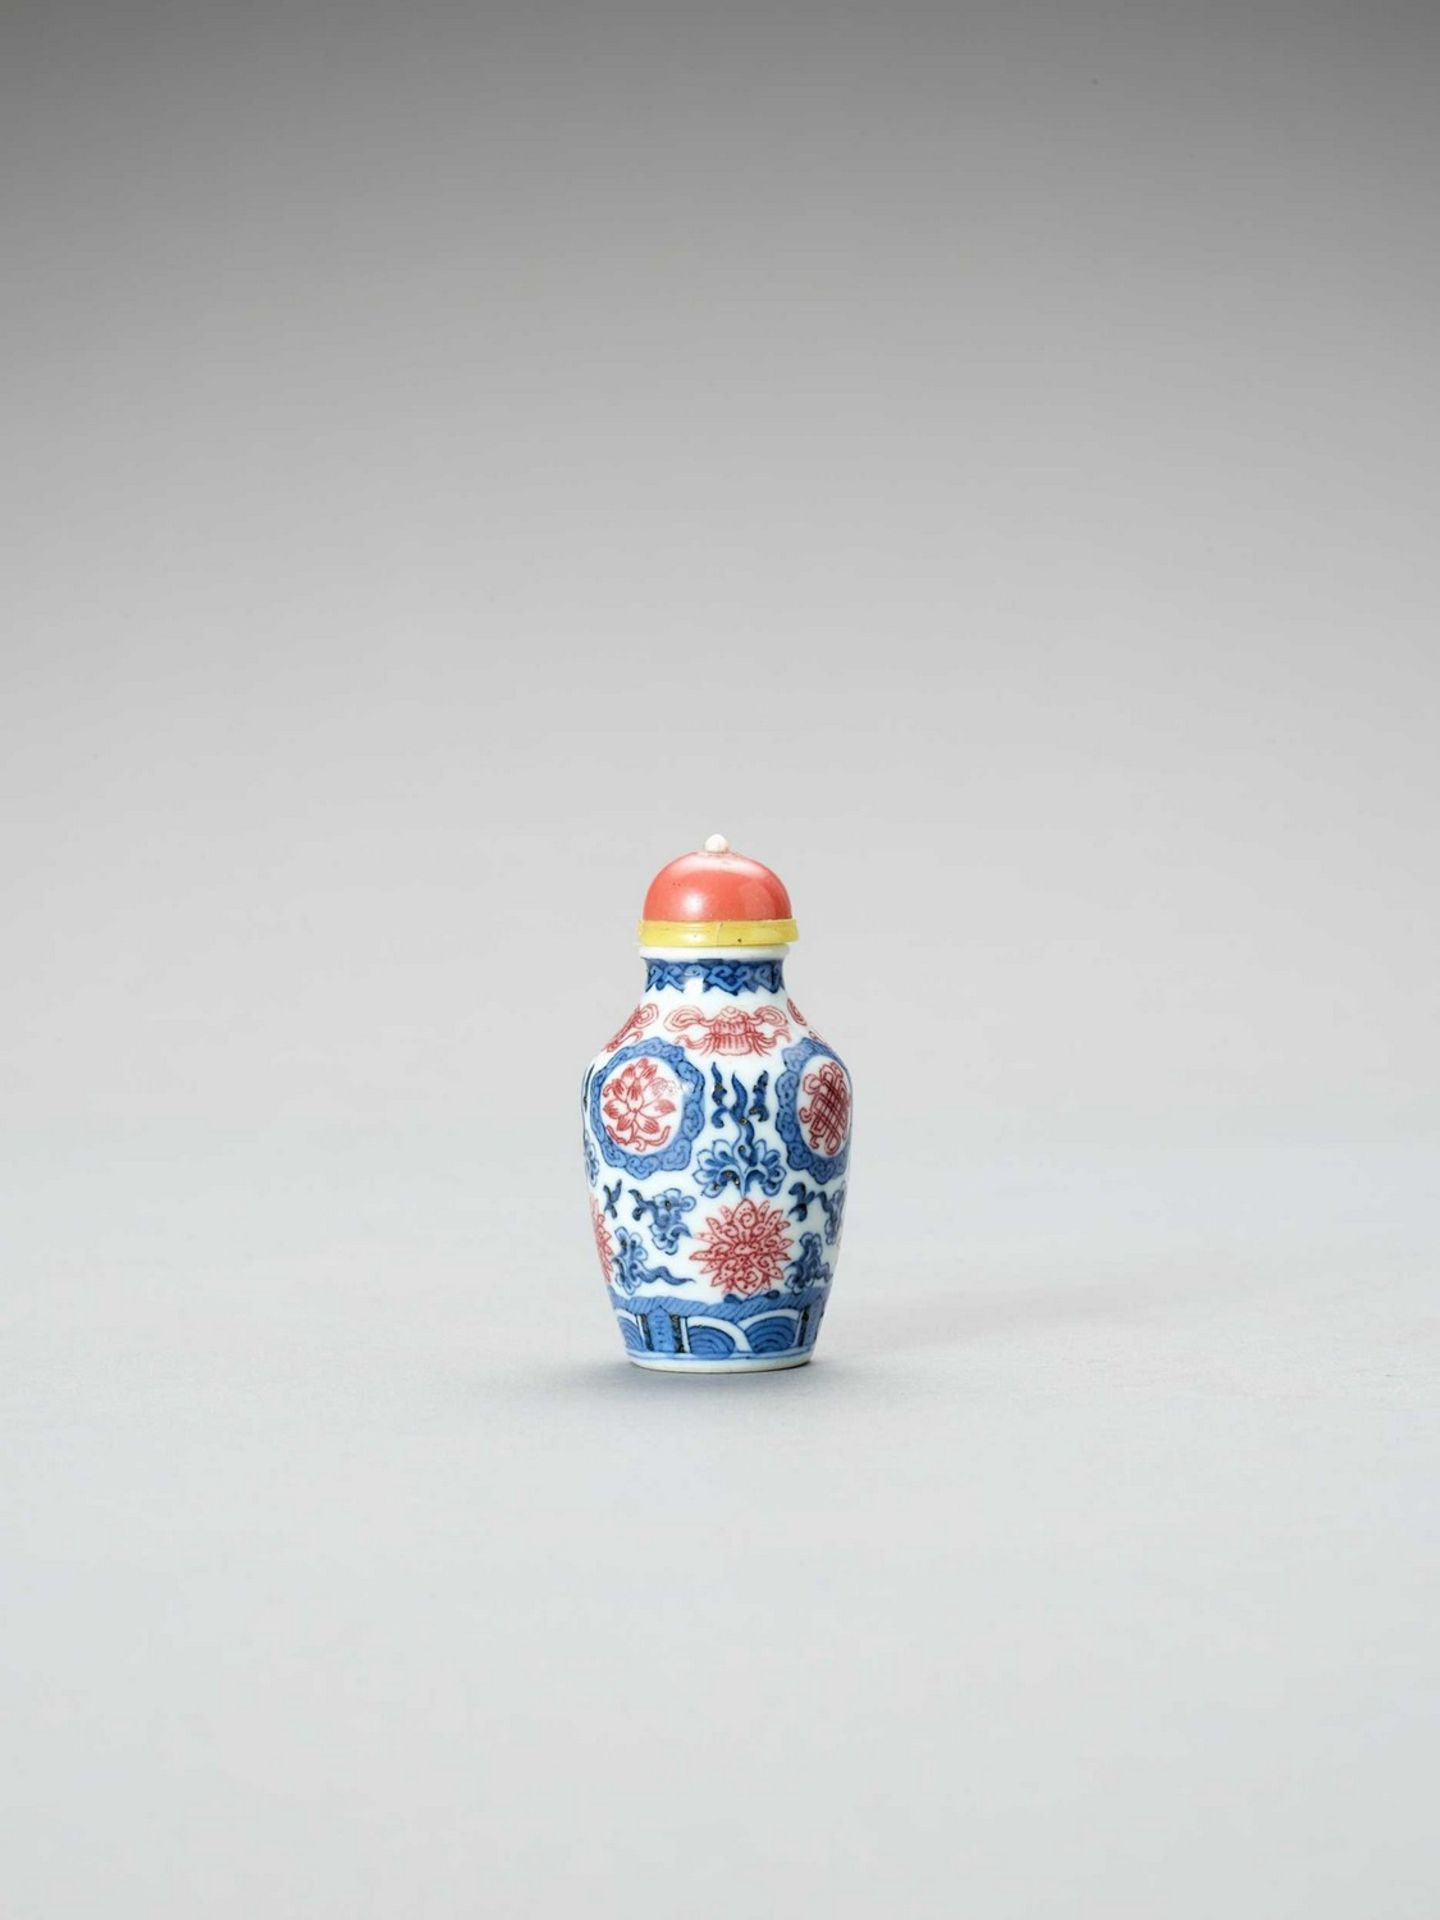 AN IRON-RED, BLUE AND WHITE PORCELAIN SNUFF BOTTLE - Image 4 of 6